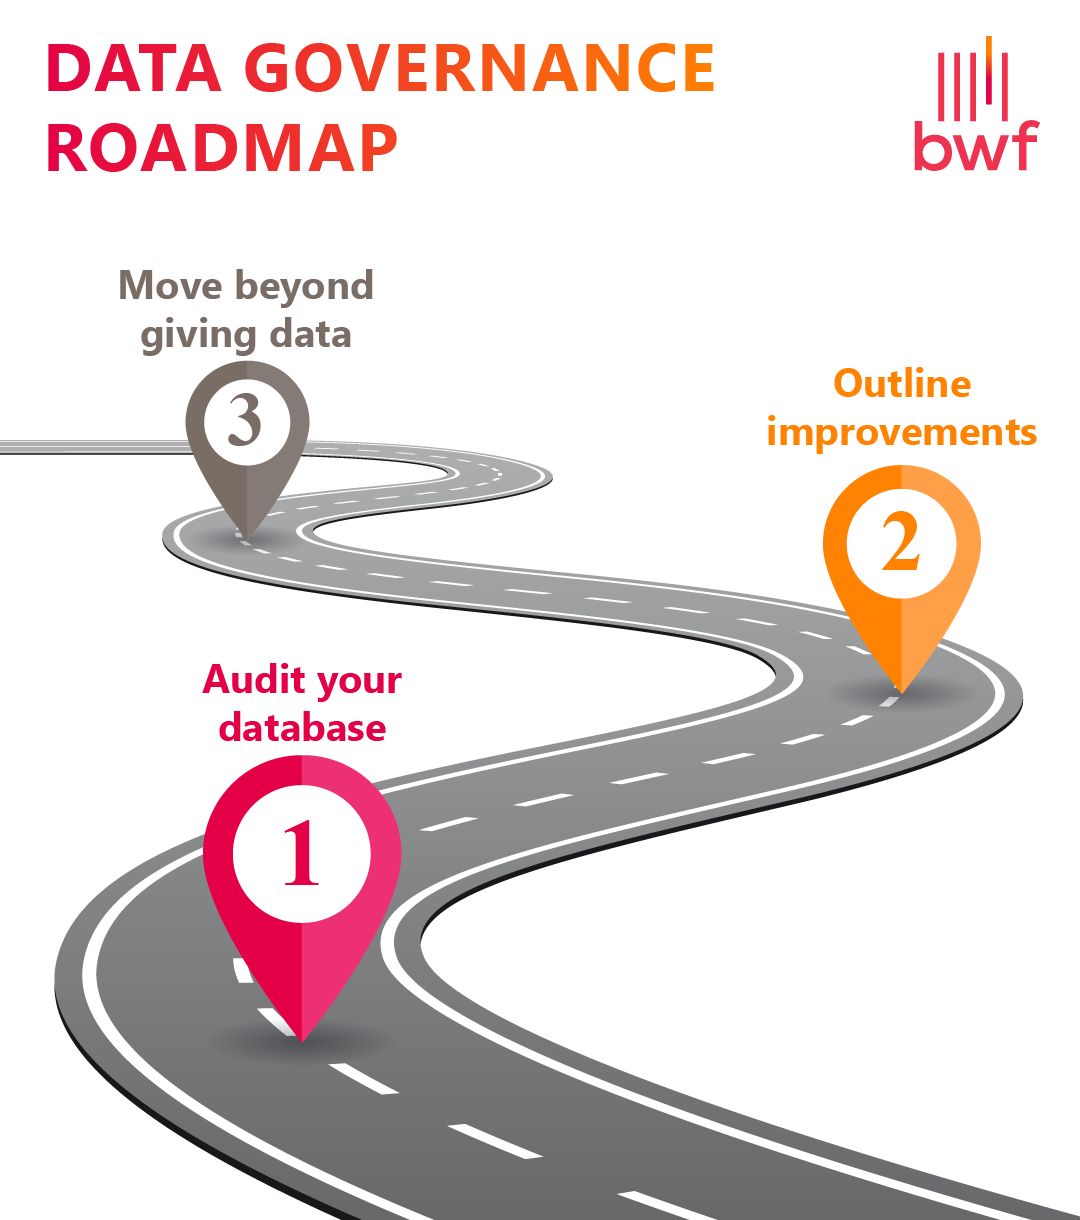 This is a data governance roadmap that outlines the steps of proper data governance (also outlined in the text below). 